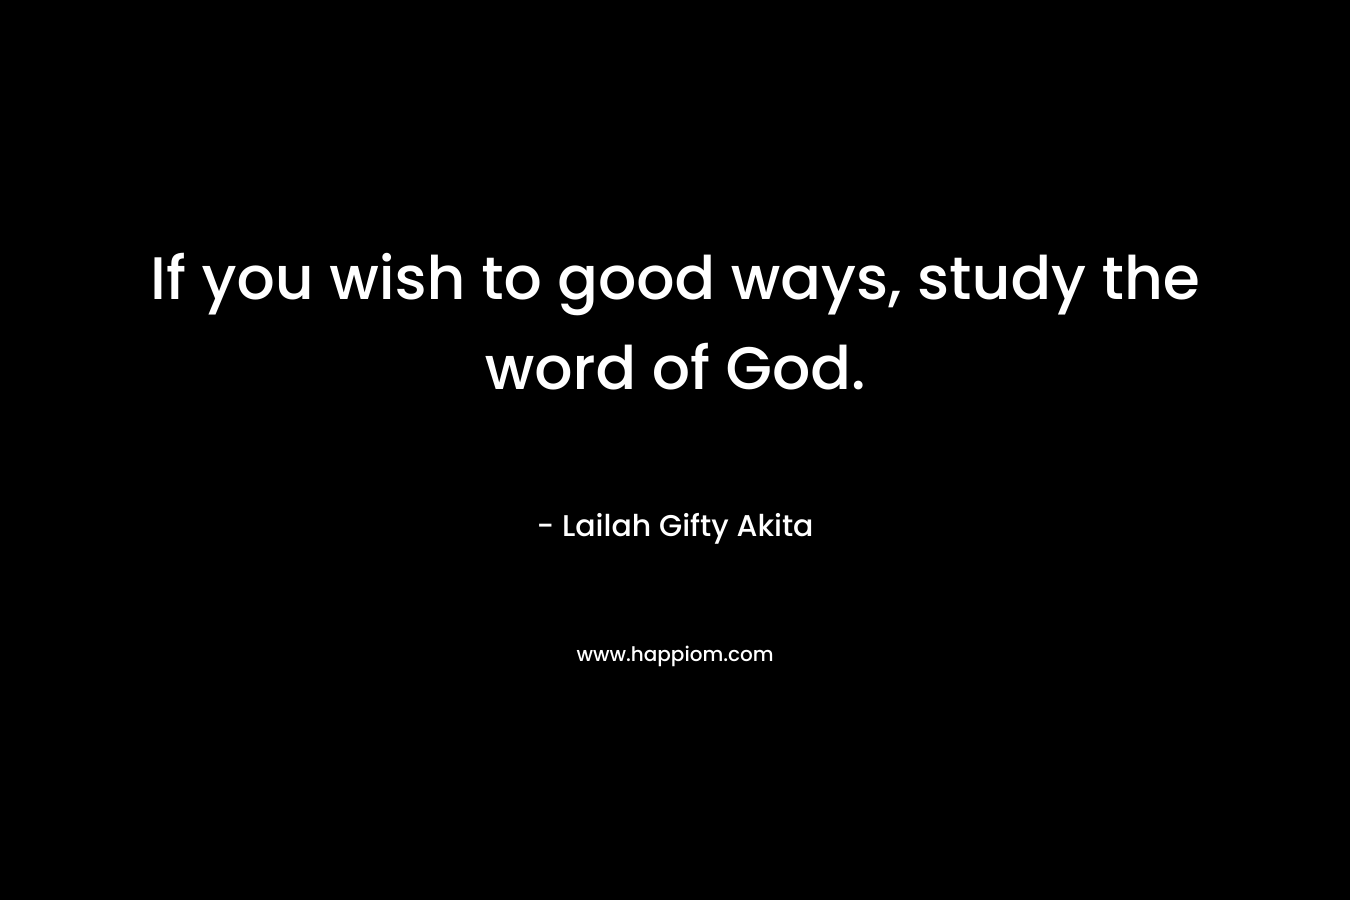 If you wish to good ways, study the word of God.